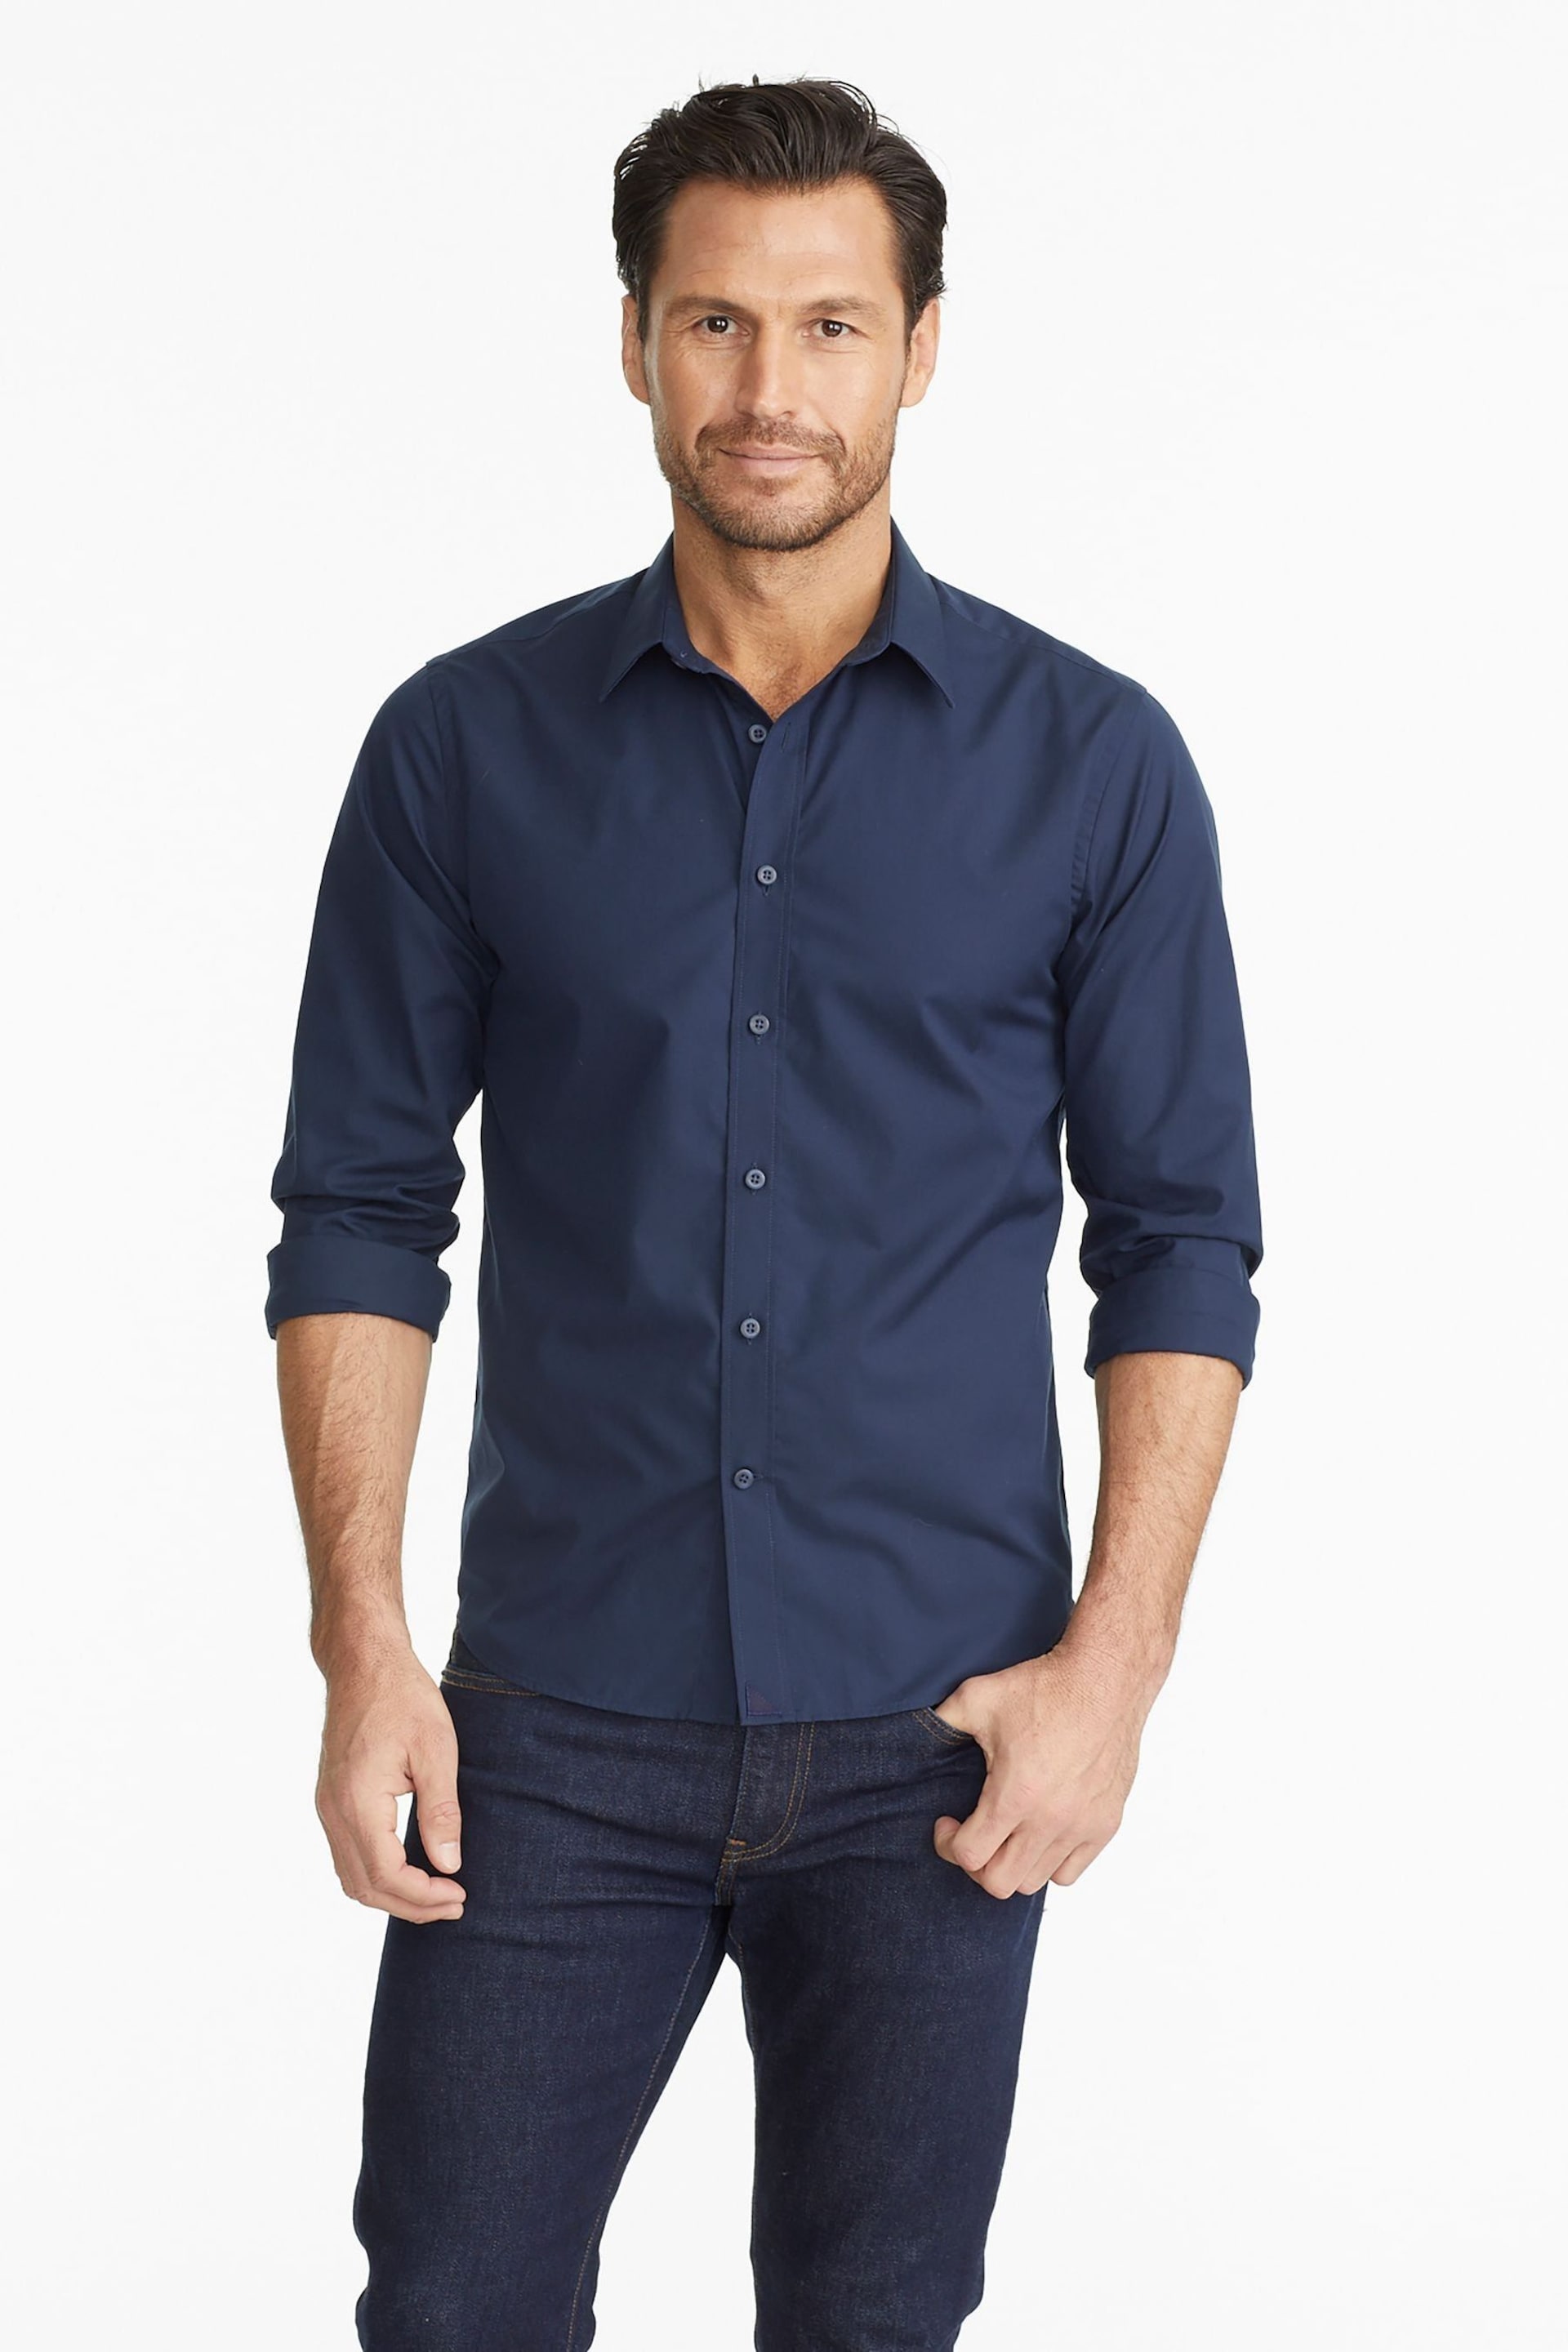 UNTUCKit Blue Dark Wrinkle-Free Relaxed Fit Castello Shirt - Image 4 of 6